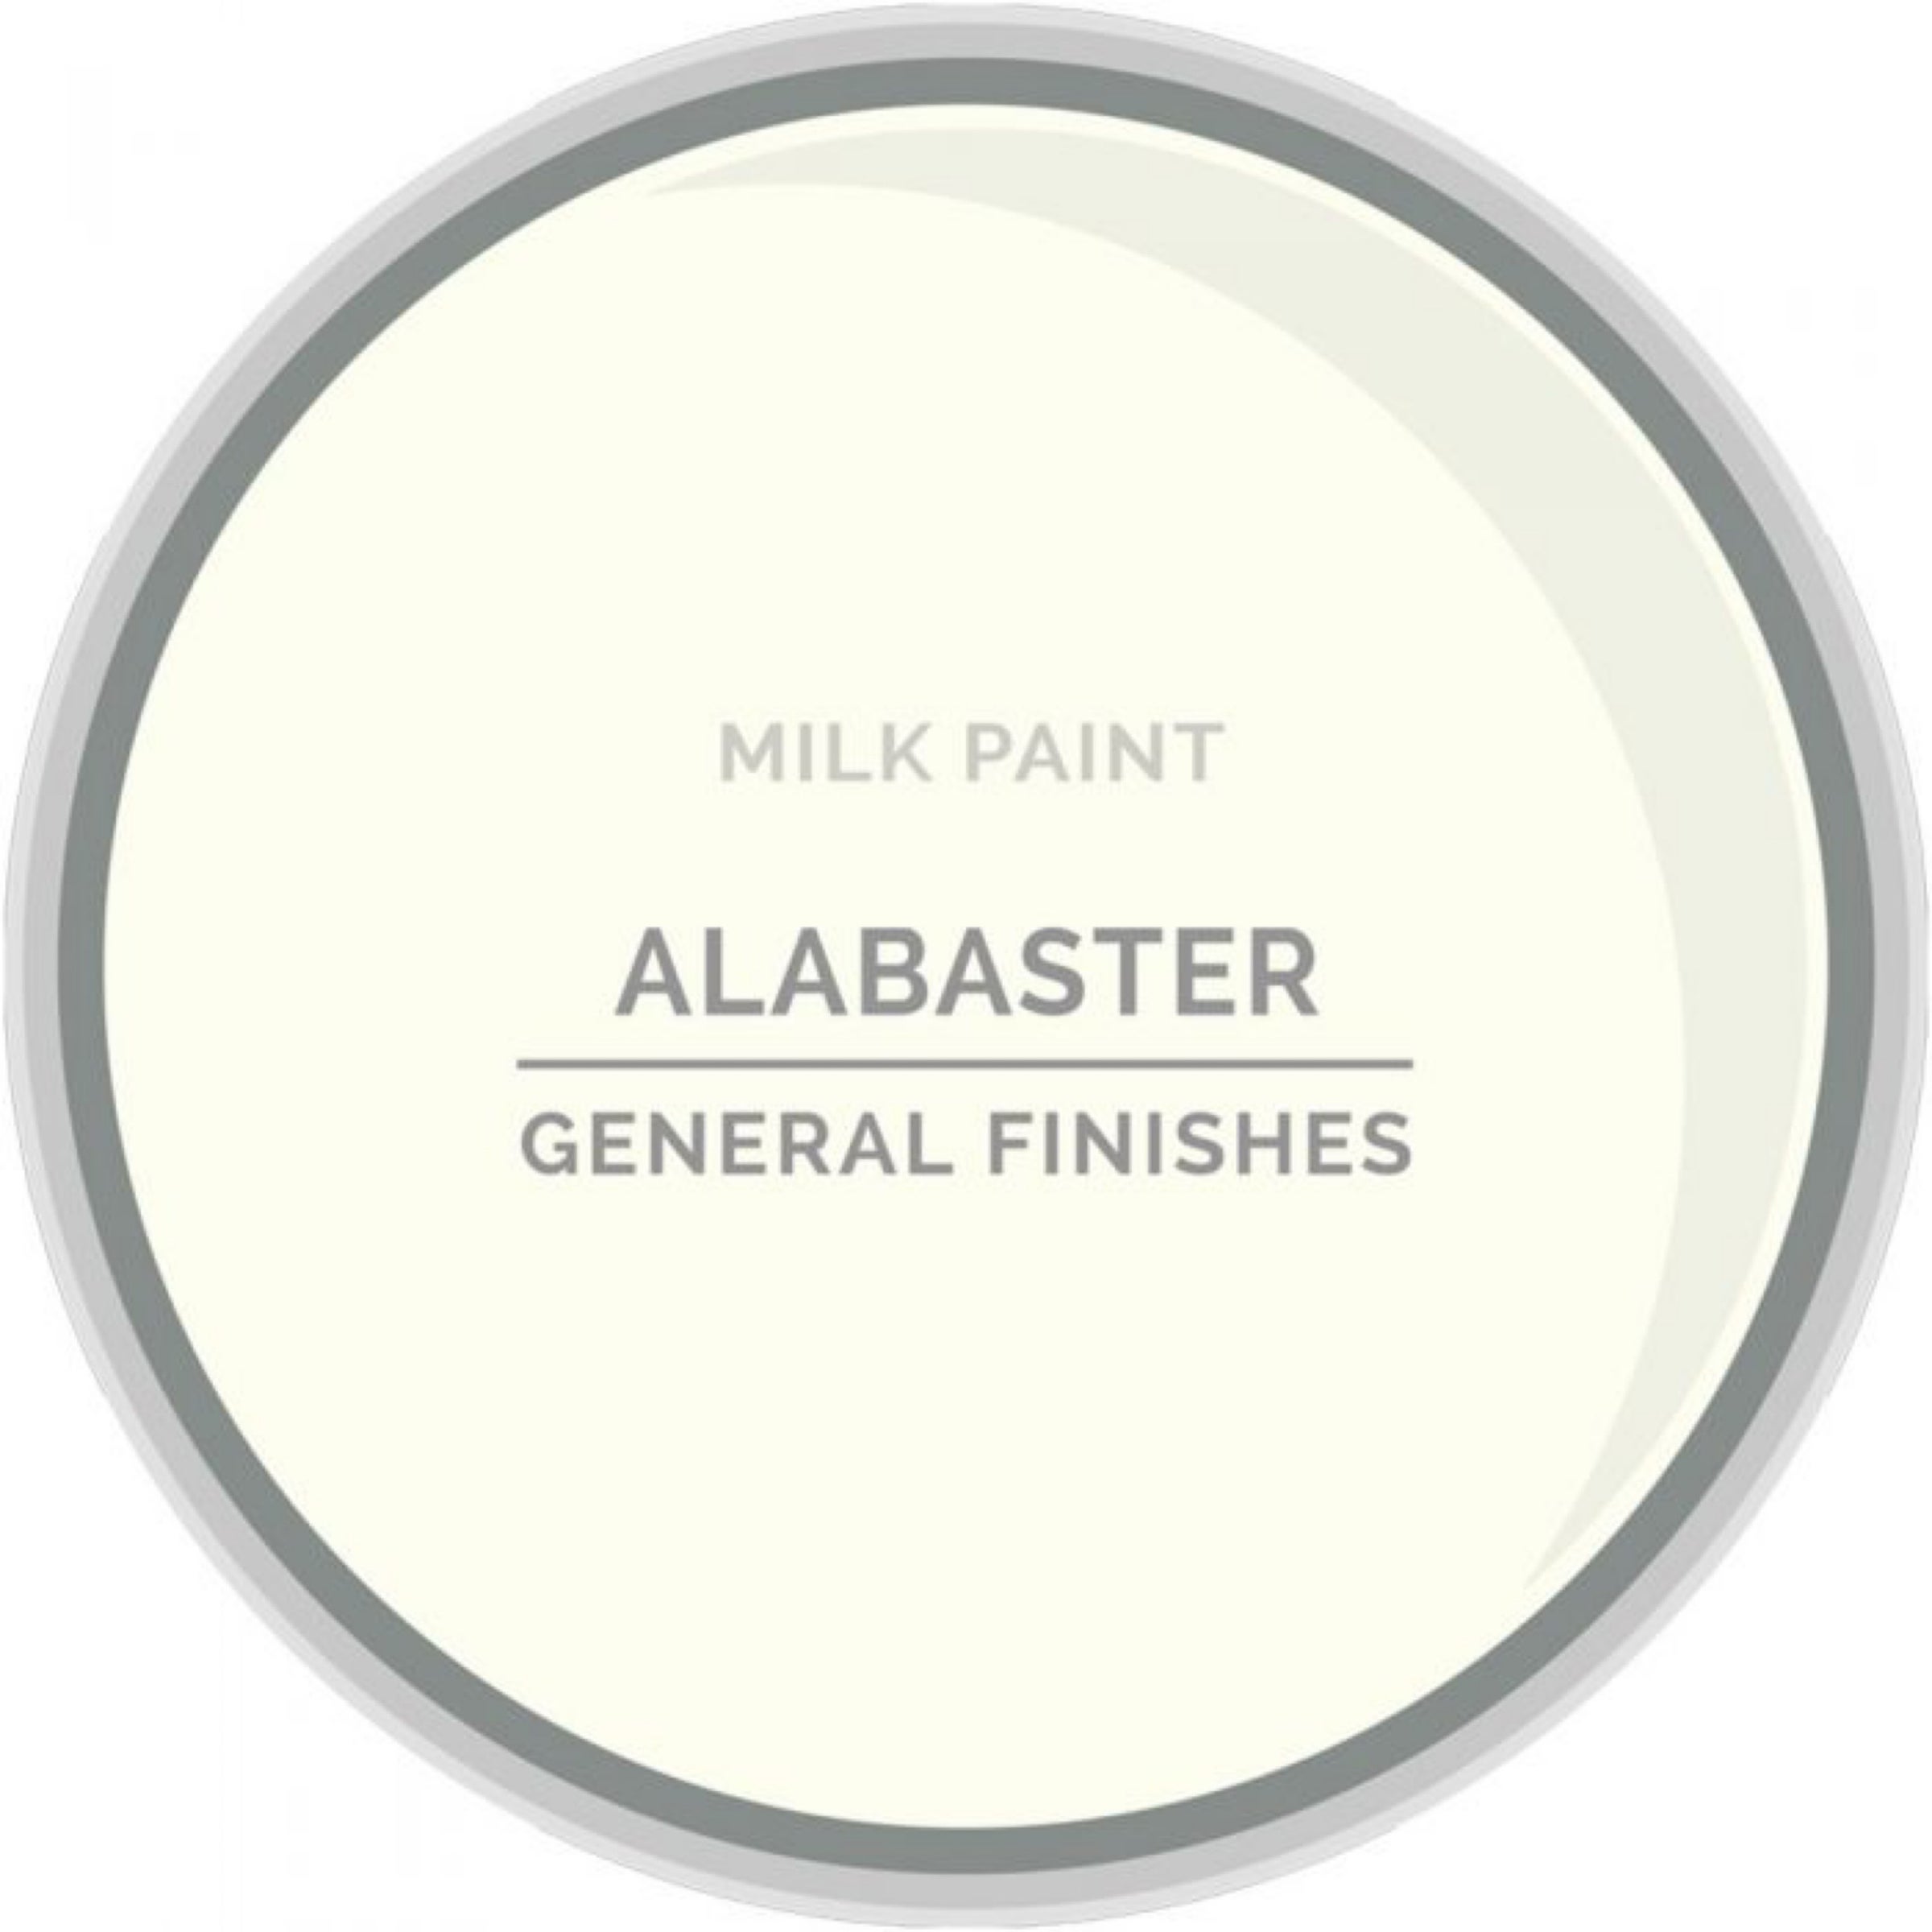 General Finishes Antique White Milk Paint, Pint